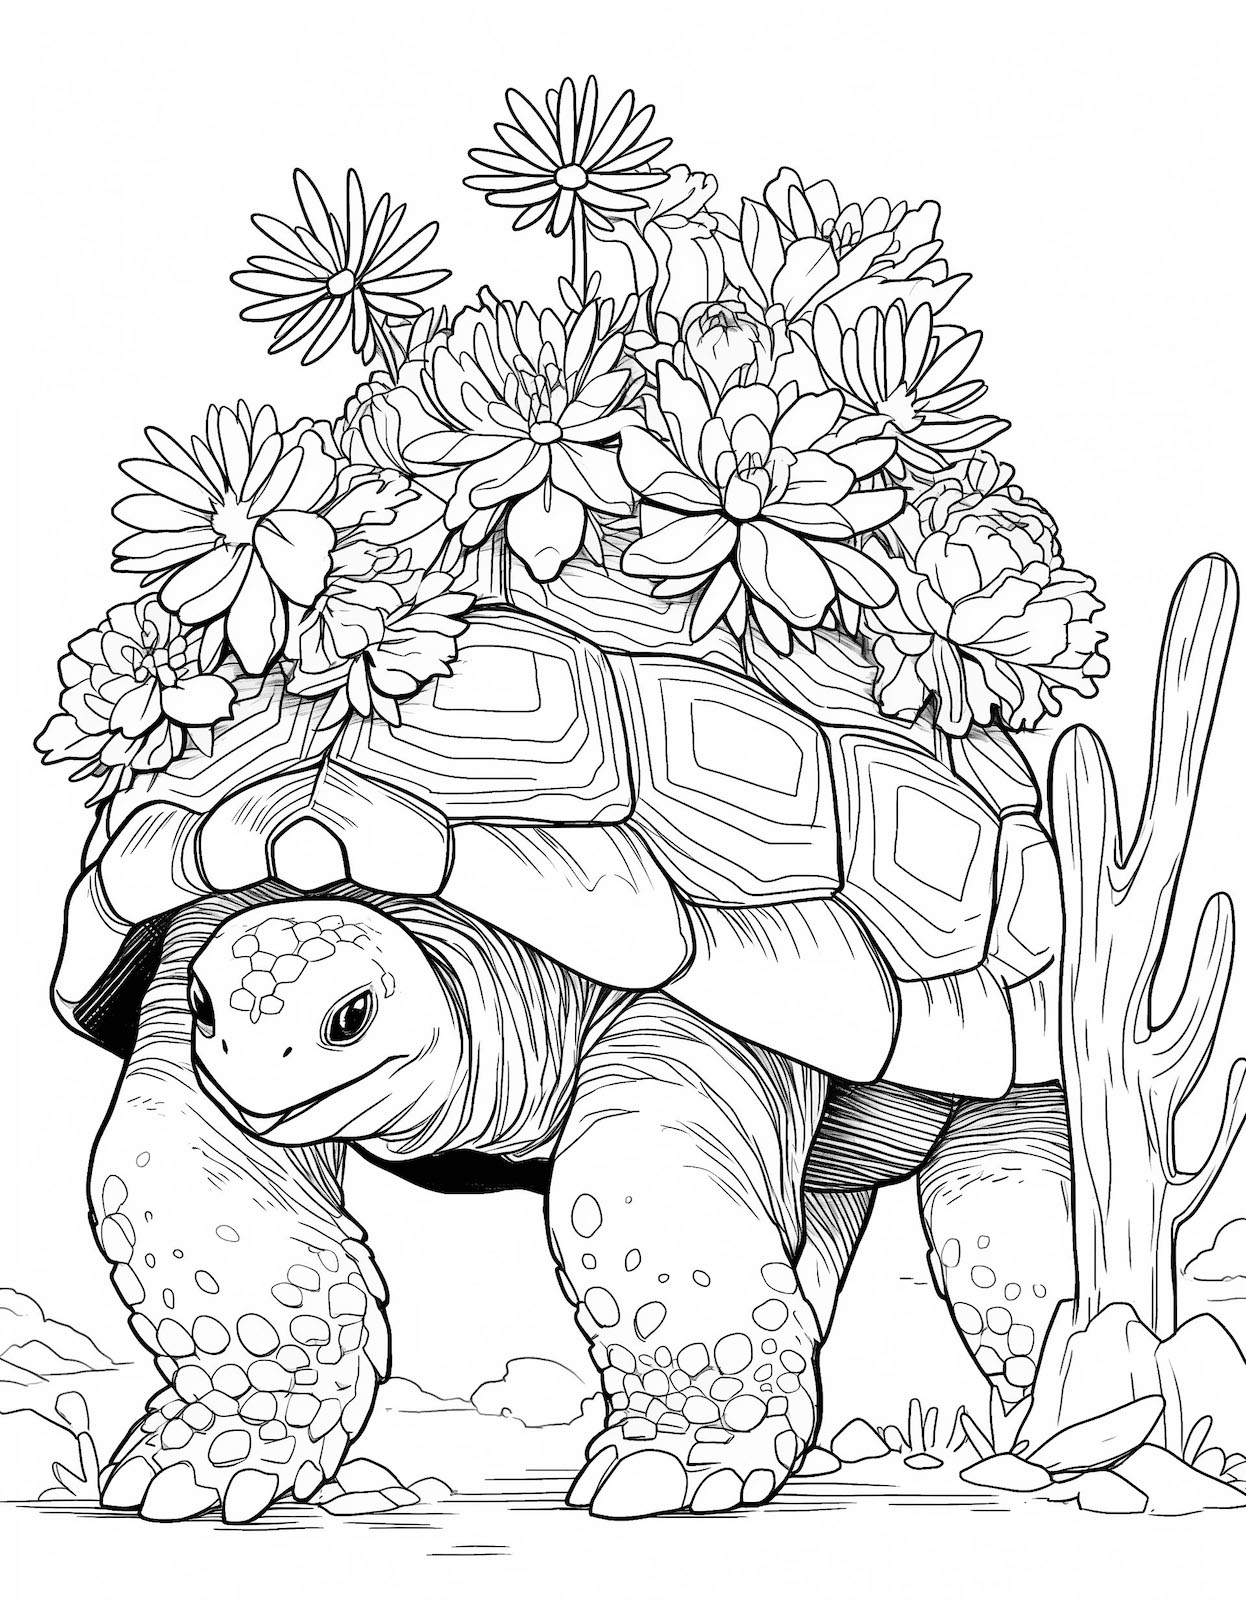 Breathtaking nature coloring pages